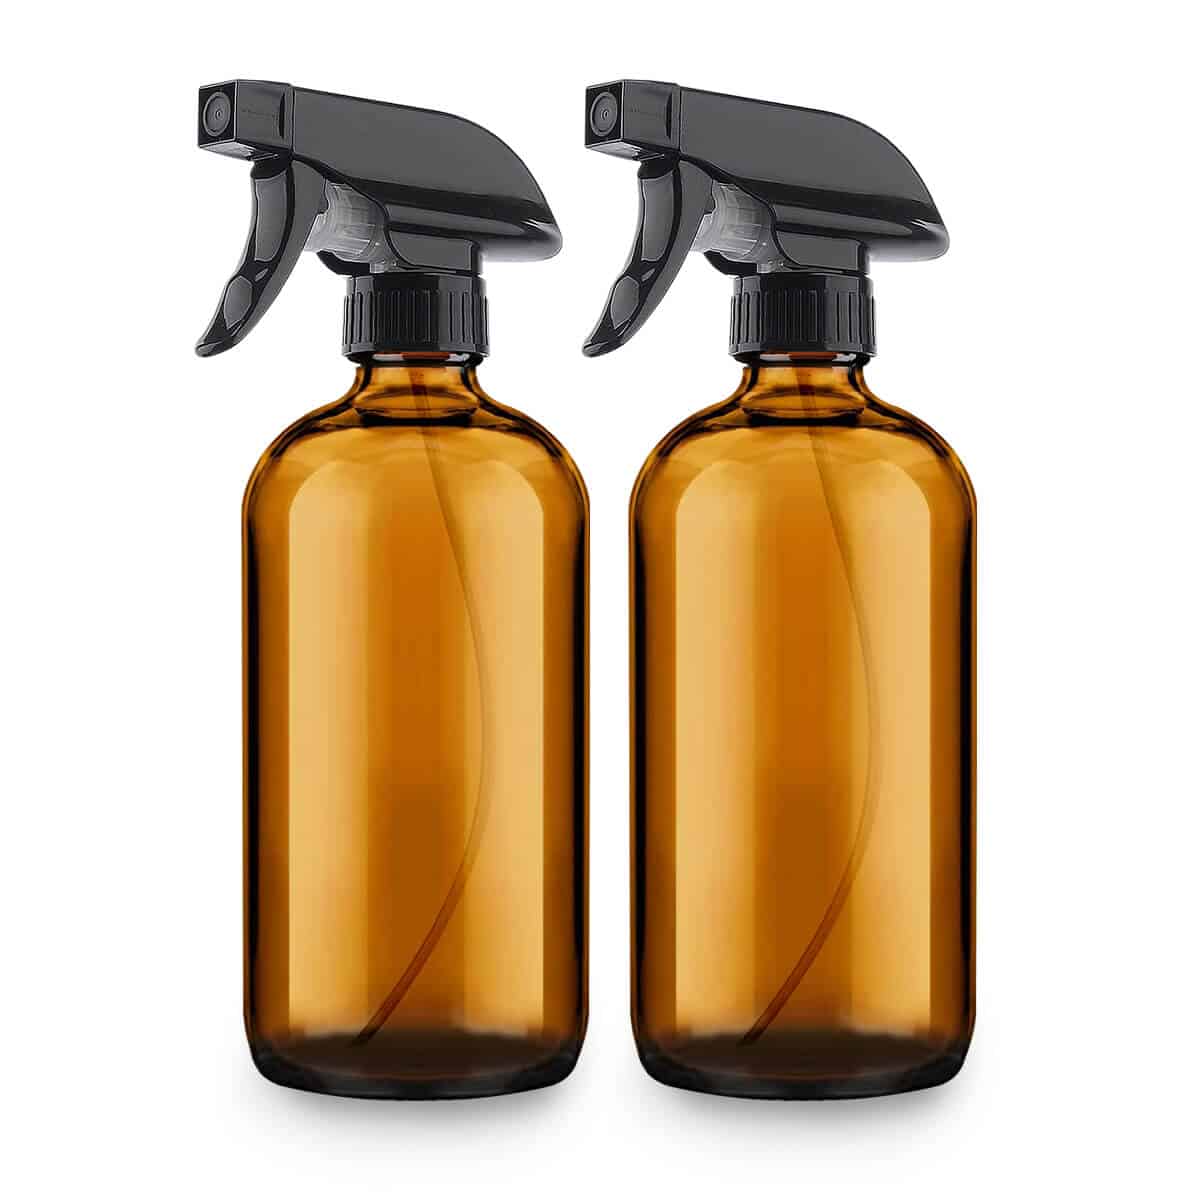 2 Pack Amber Glass Spray Bottles (16 oz) Refillable Mist & Stream Sprayer for Essential Oils, Aromatherapy, Hair, Kitchen & Cleaning Solutions